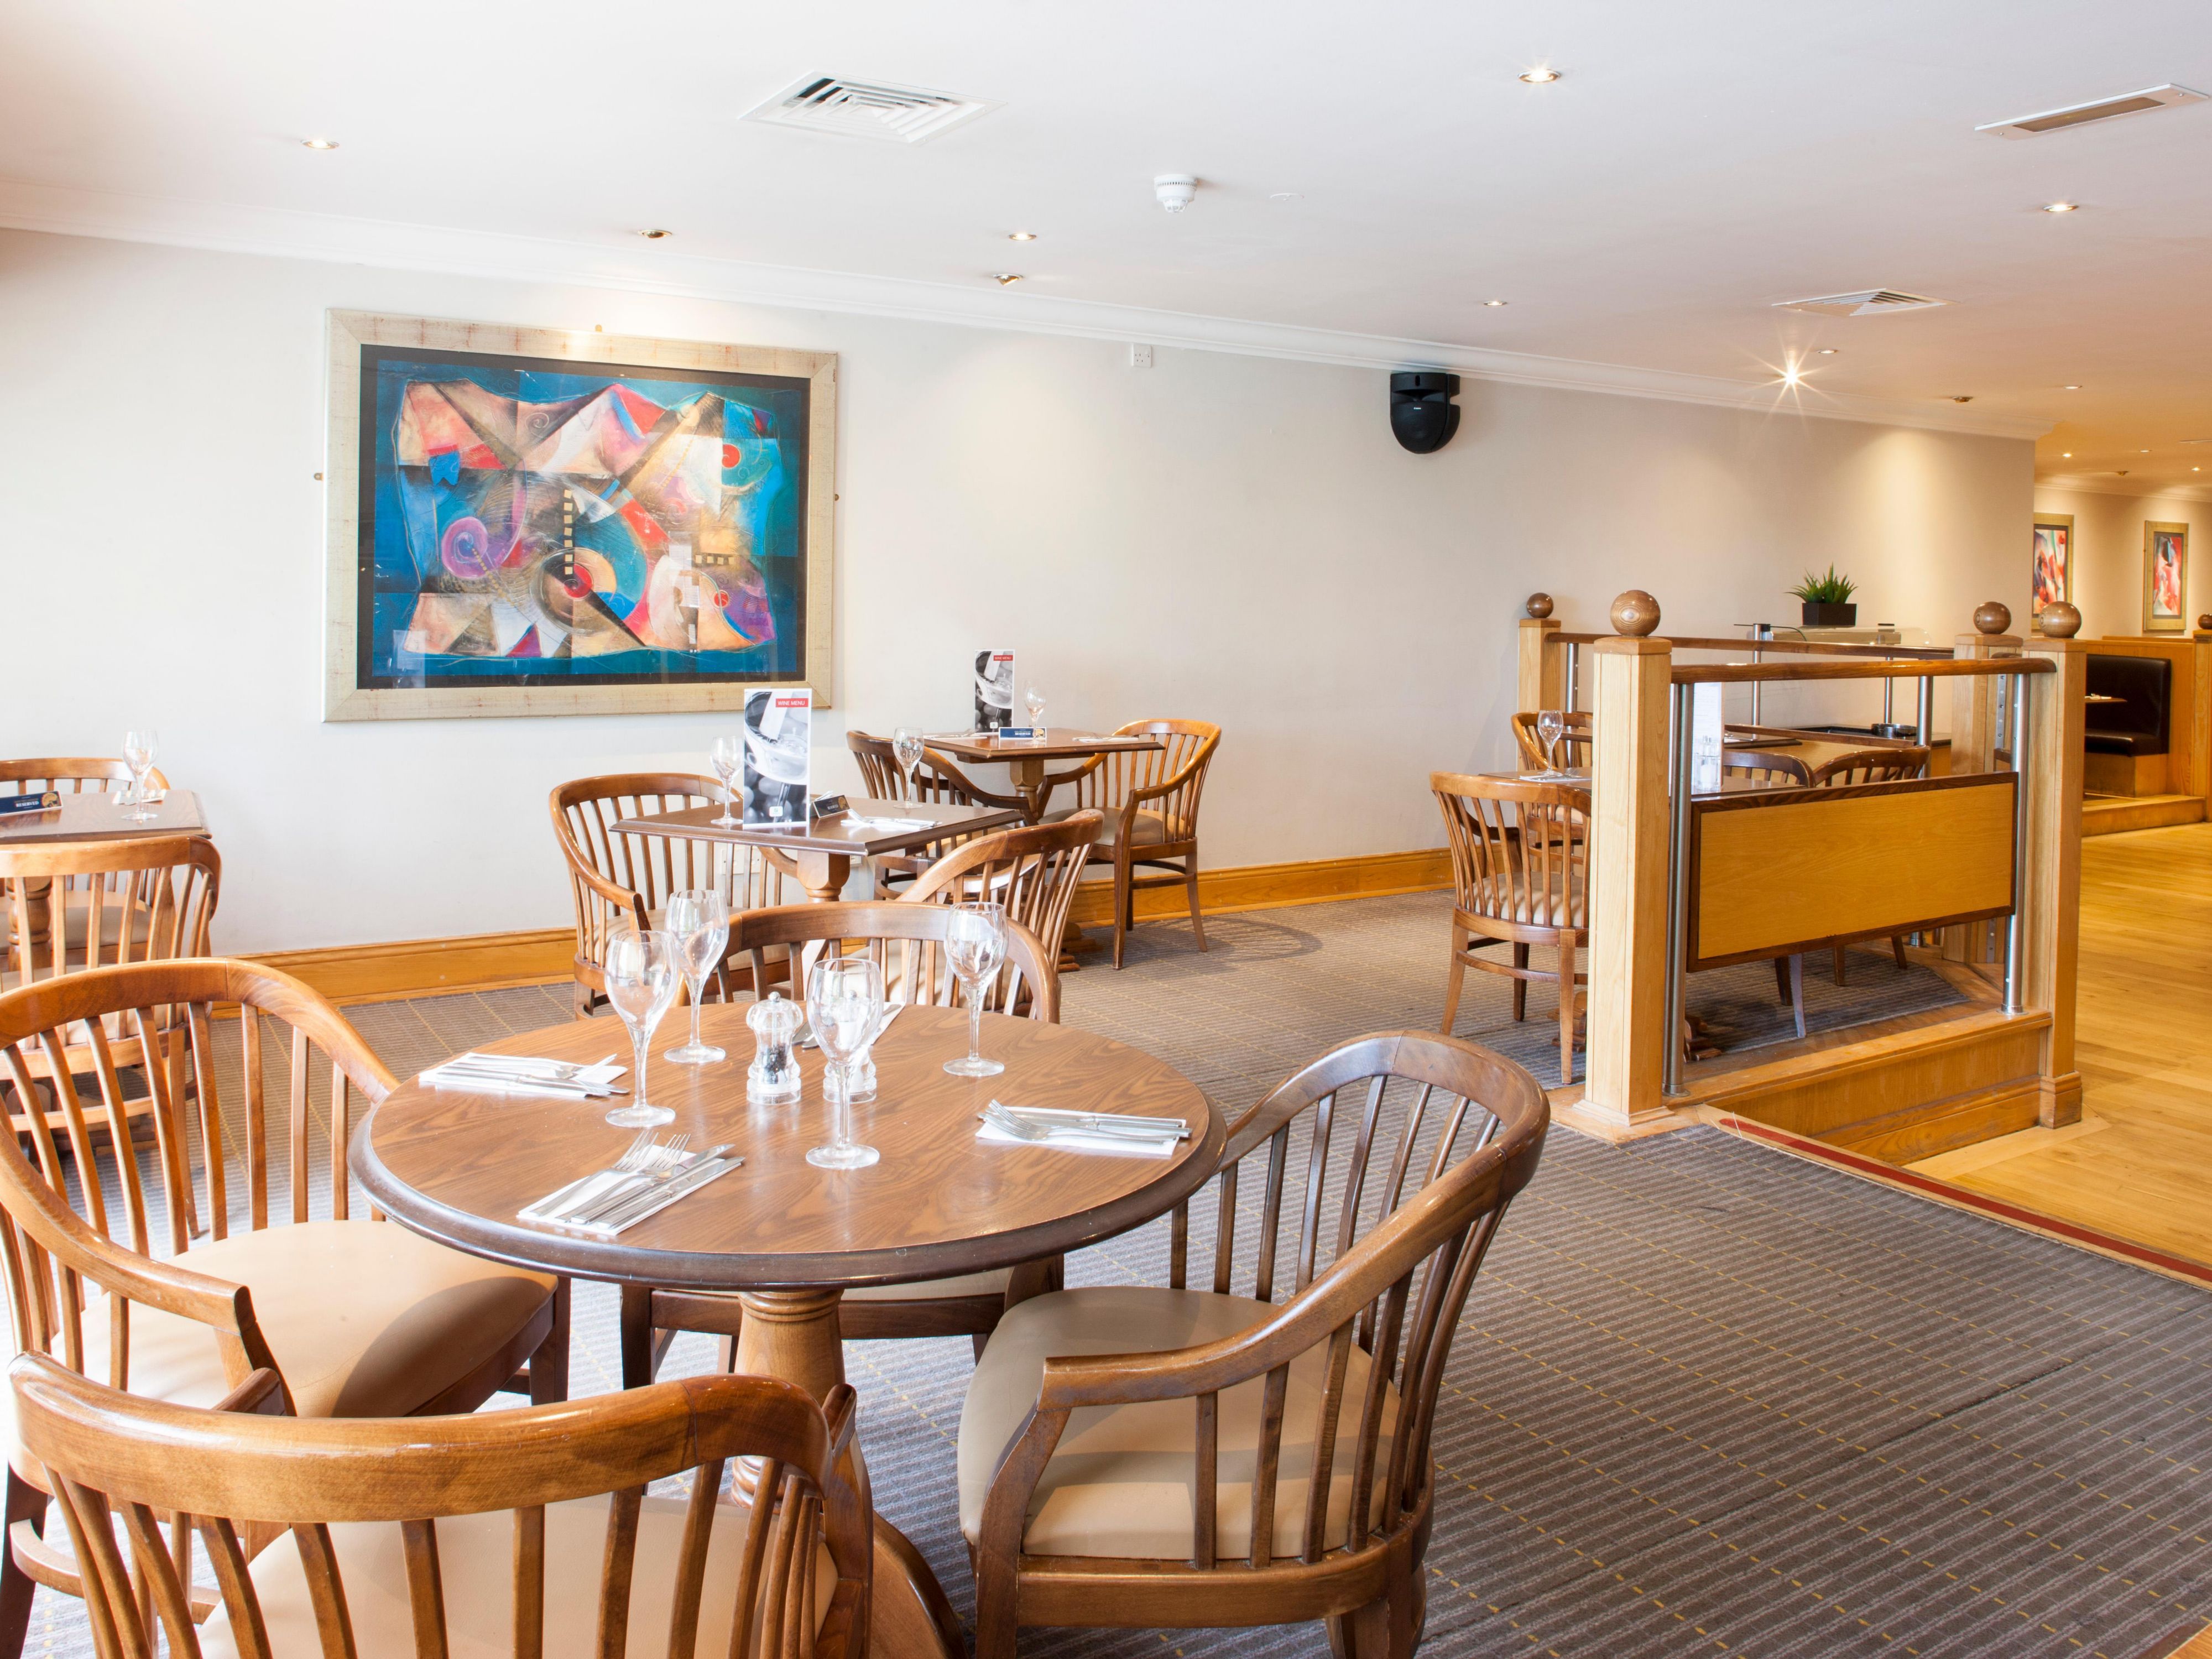 Our Traders Restaurant offers a wide range of delicious dining options, while the bar provides an informal and relaxed space to unwind, grab a light bite to eat, or use as an informal place to catch up on work. We also have ample outdoor seating so you can enjoy a spot of al fresco dining on warmer days. 